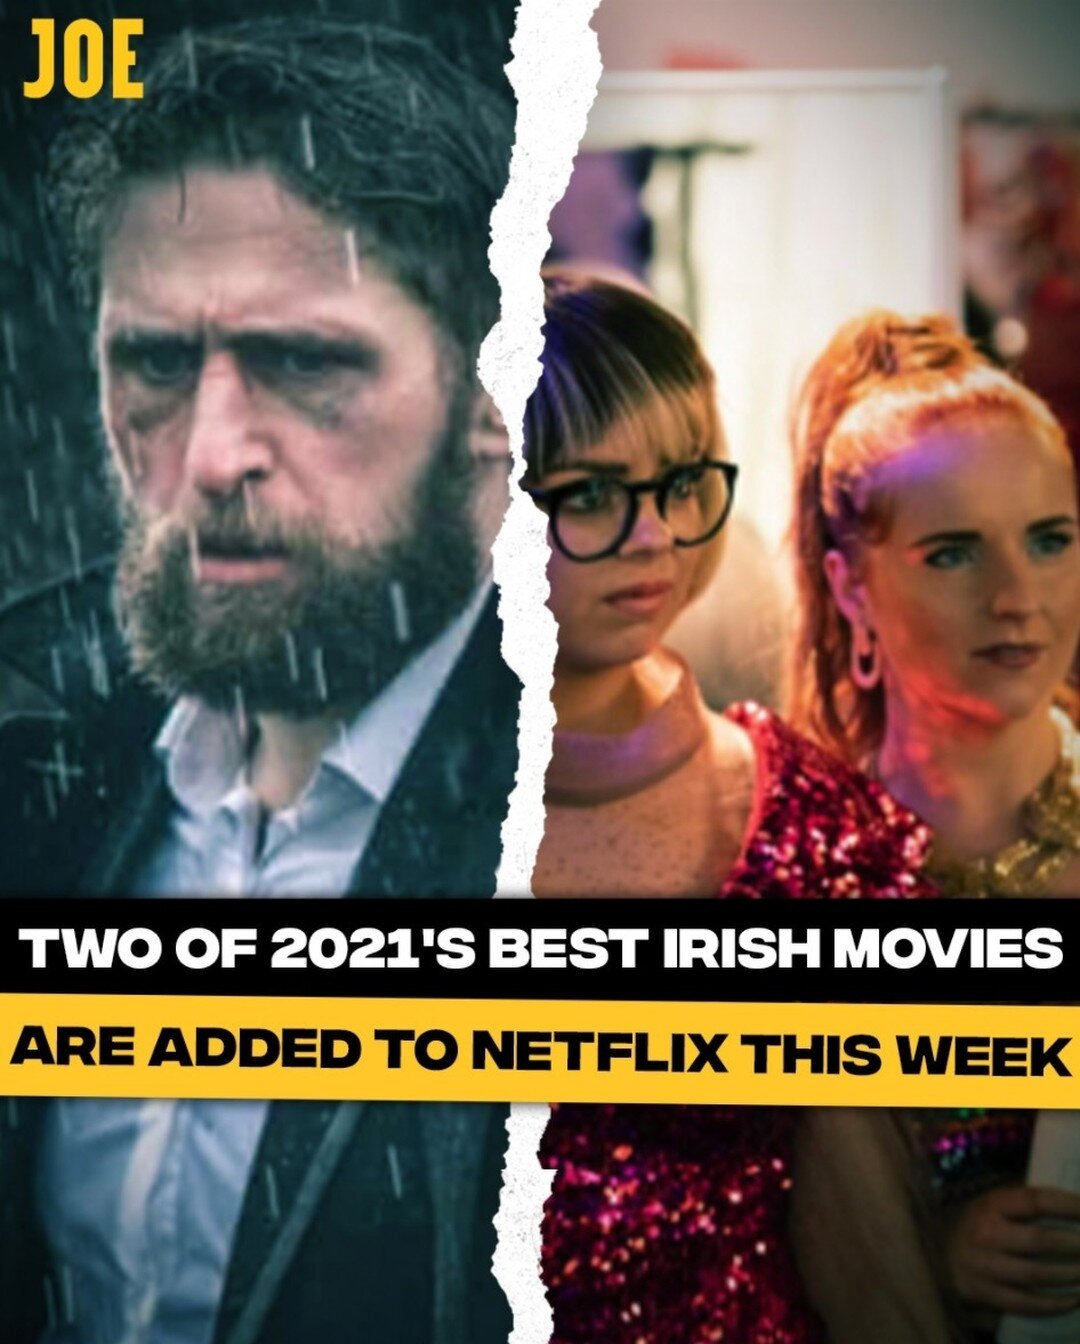 Two of 2021's Best Irish Movies are Coming to @netflixuk this week 🇮🇪 Deadly Cuts and Redemption Of A Rogue 
#supportirishfilm  #deadlycuts #redemptionofarogue 
#irishcomedy
#netflixuk 
@joe.ie @wildcard_distribution @screenireland